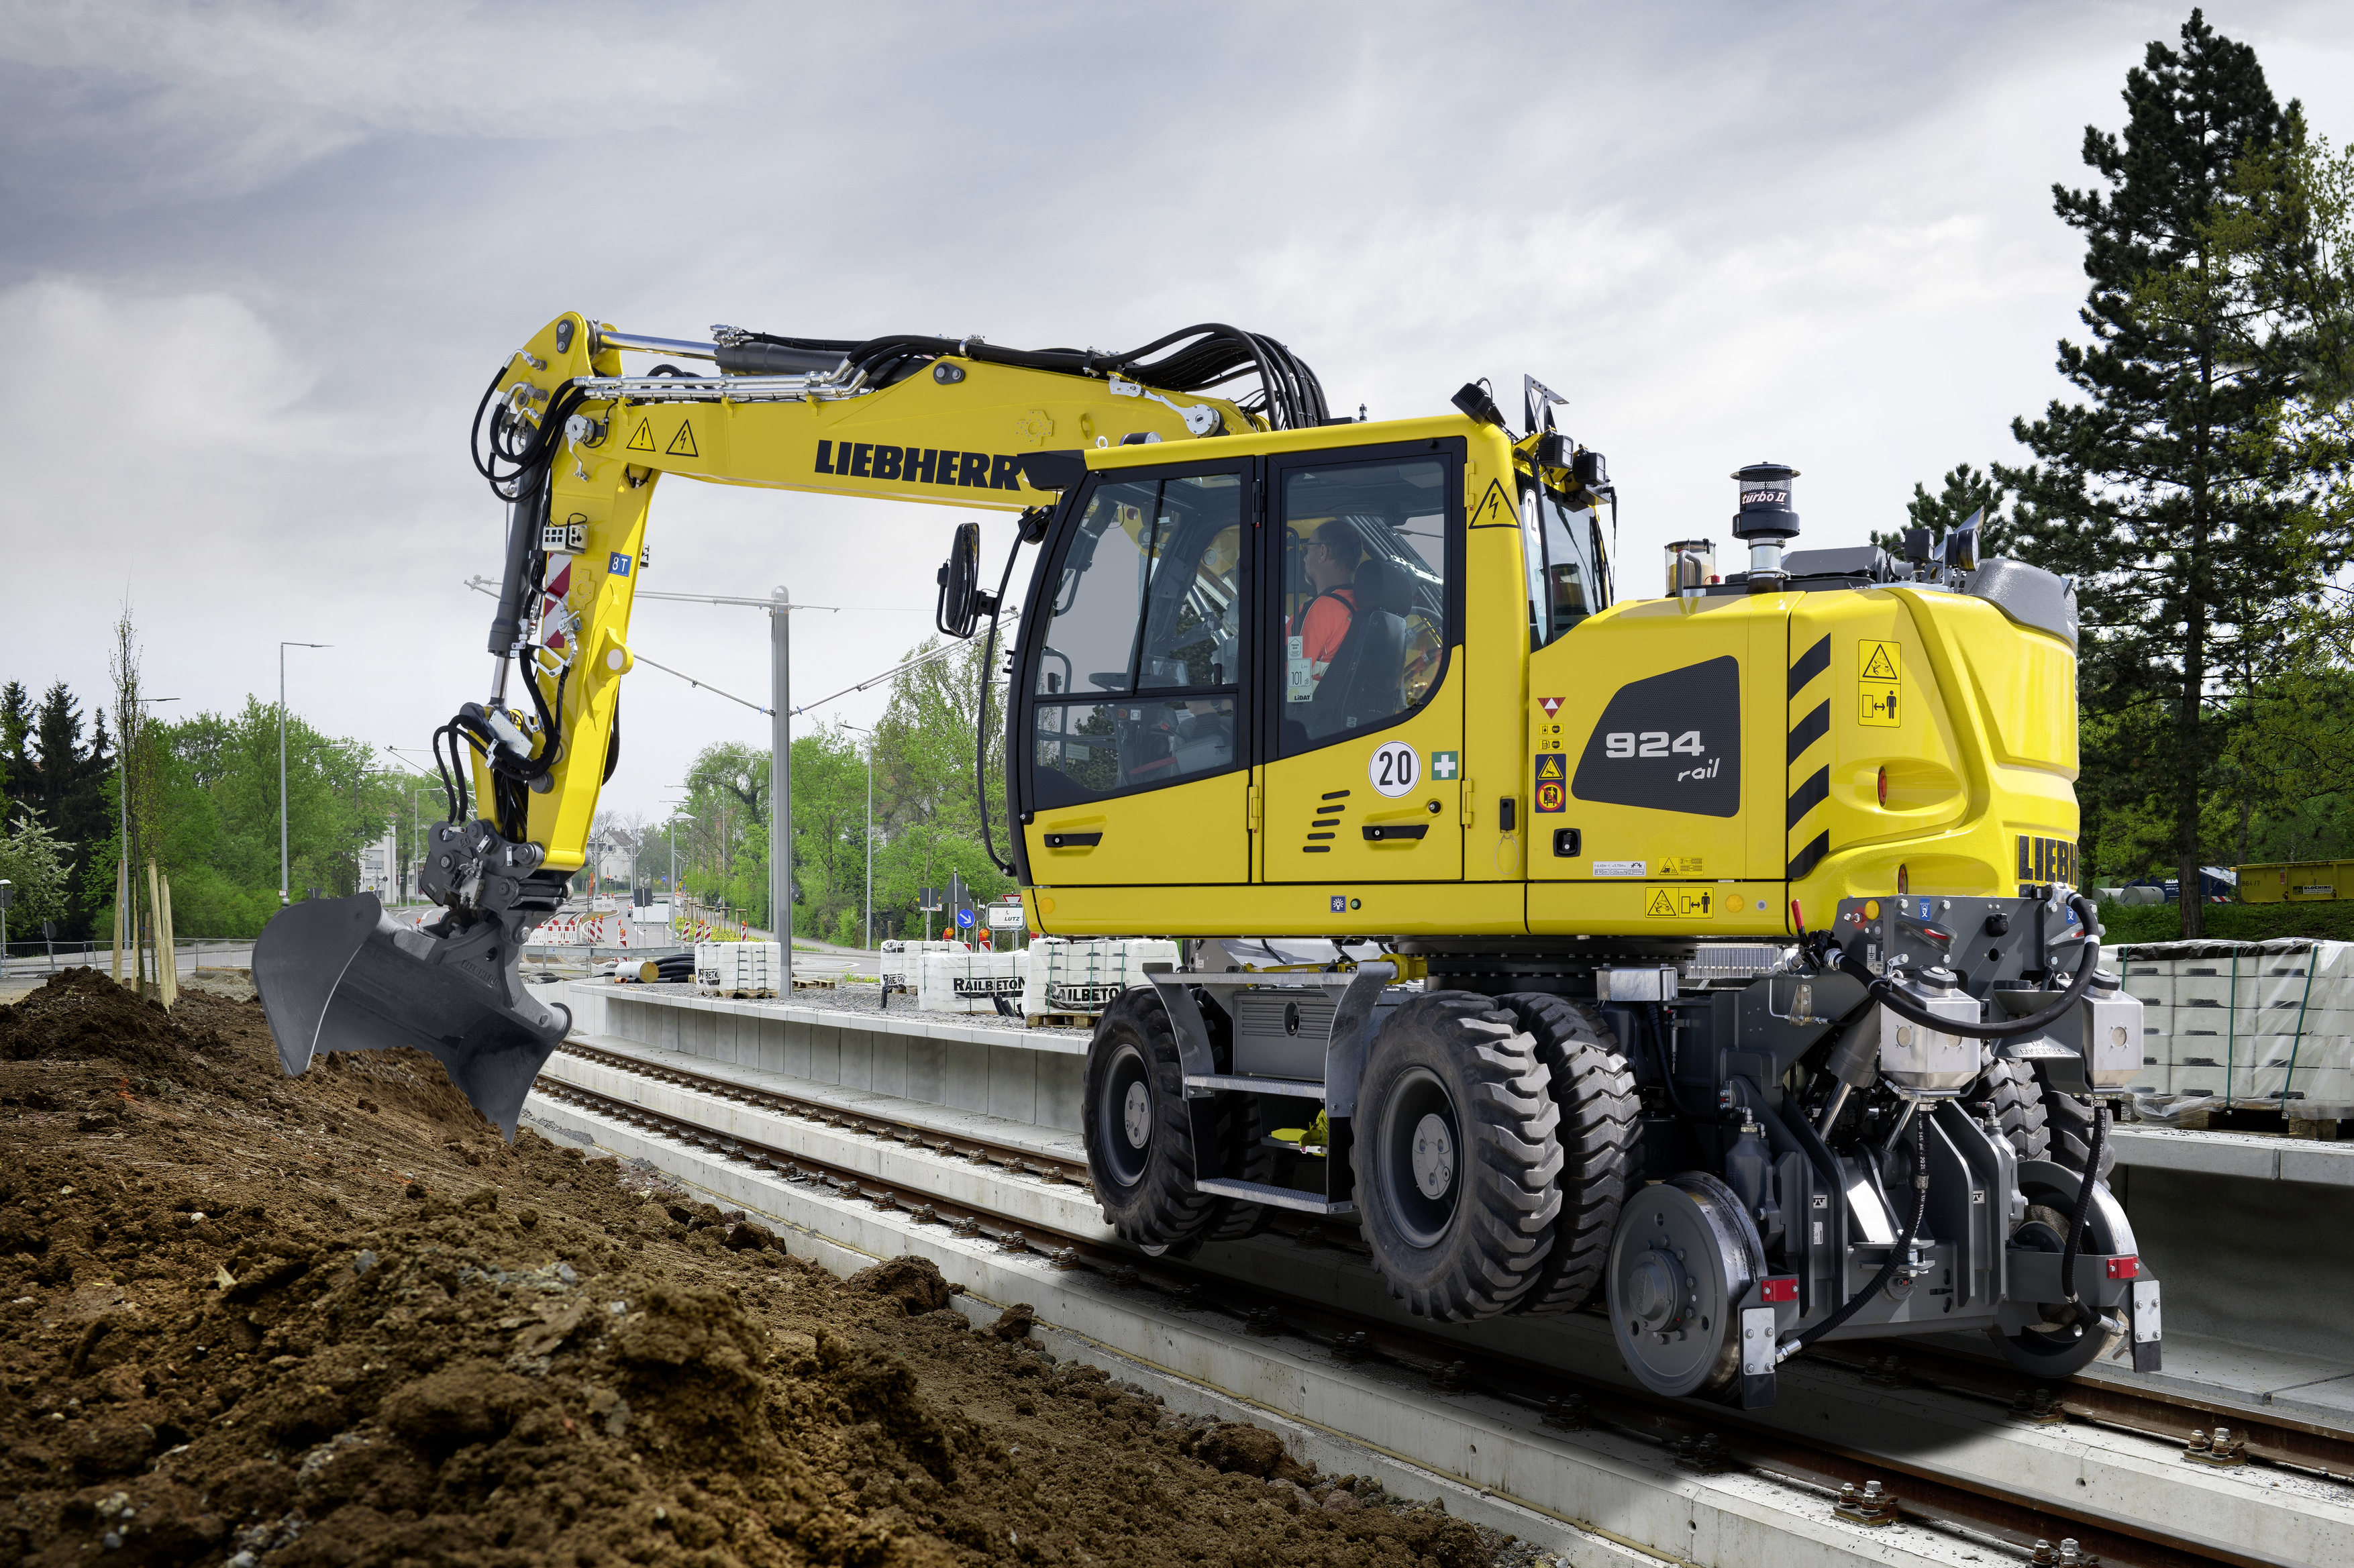 Liebherr has been successfully developing and producing railroad excavators for use both on the road and in rail transport at its site in Kirchdorf an der Iller since 1967. With the A 924 Rail Litronic, Liebherr is presenting a representative of the new generation at the trade fair.